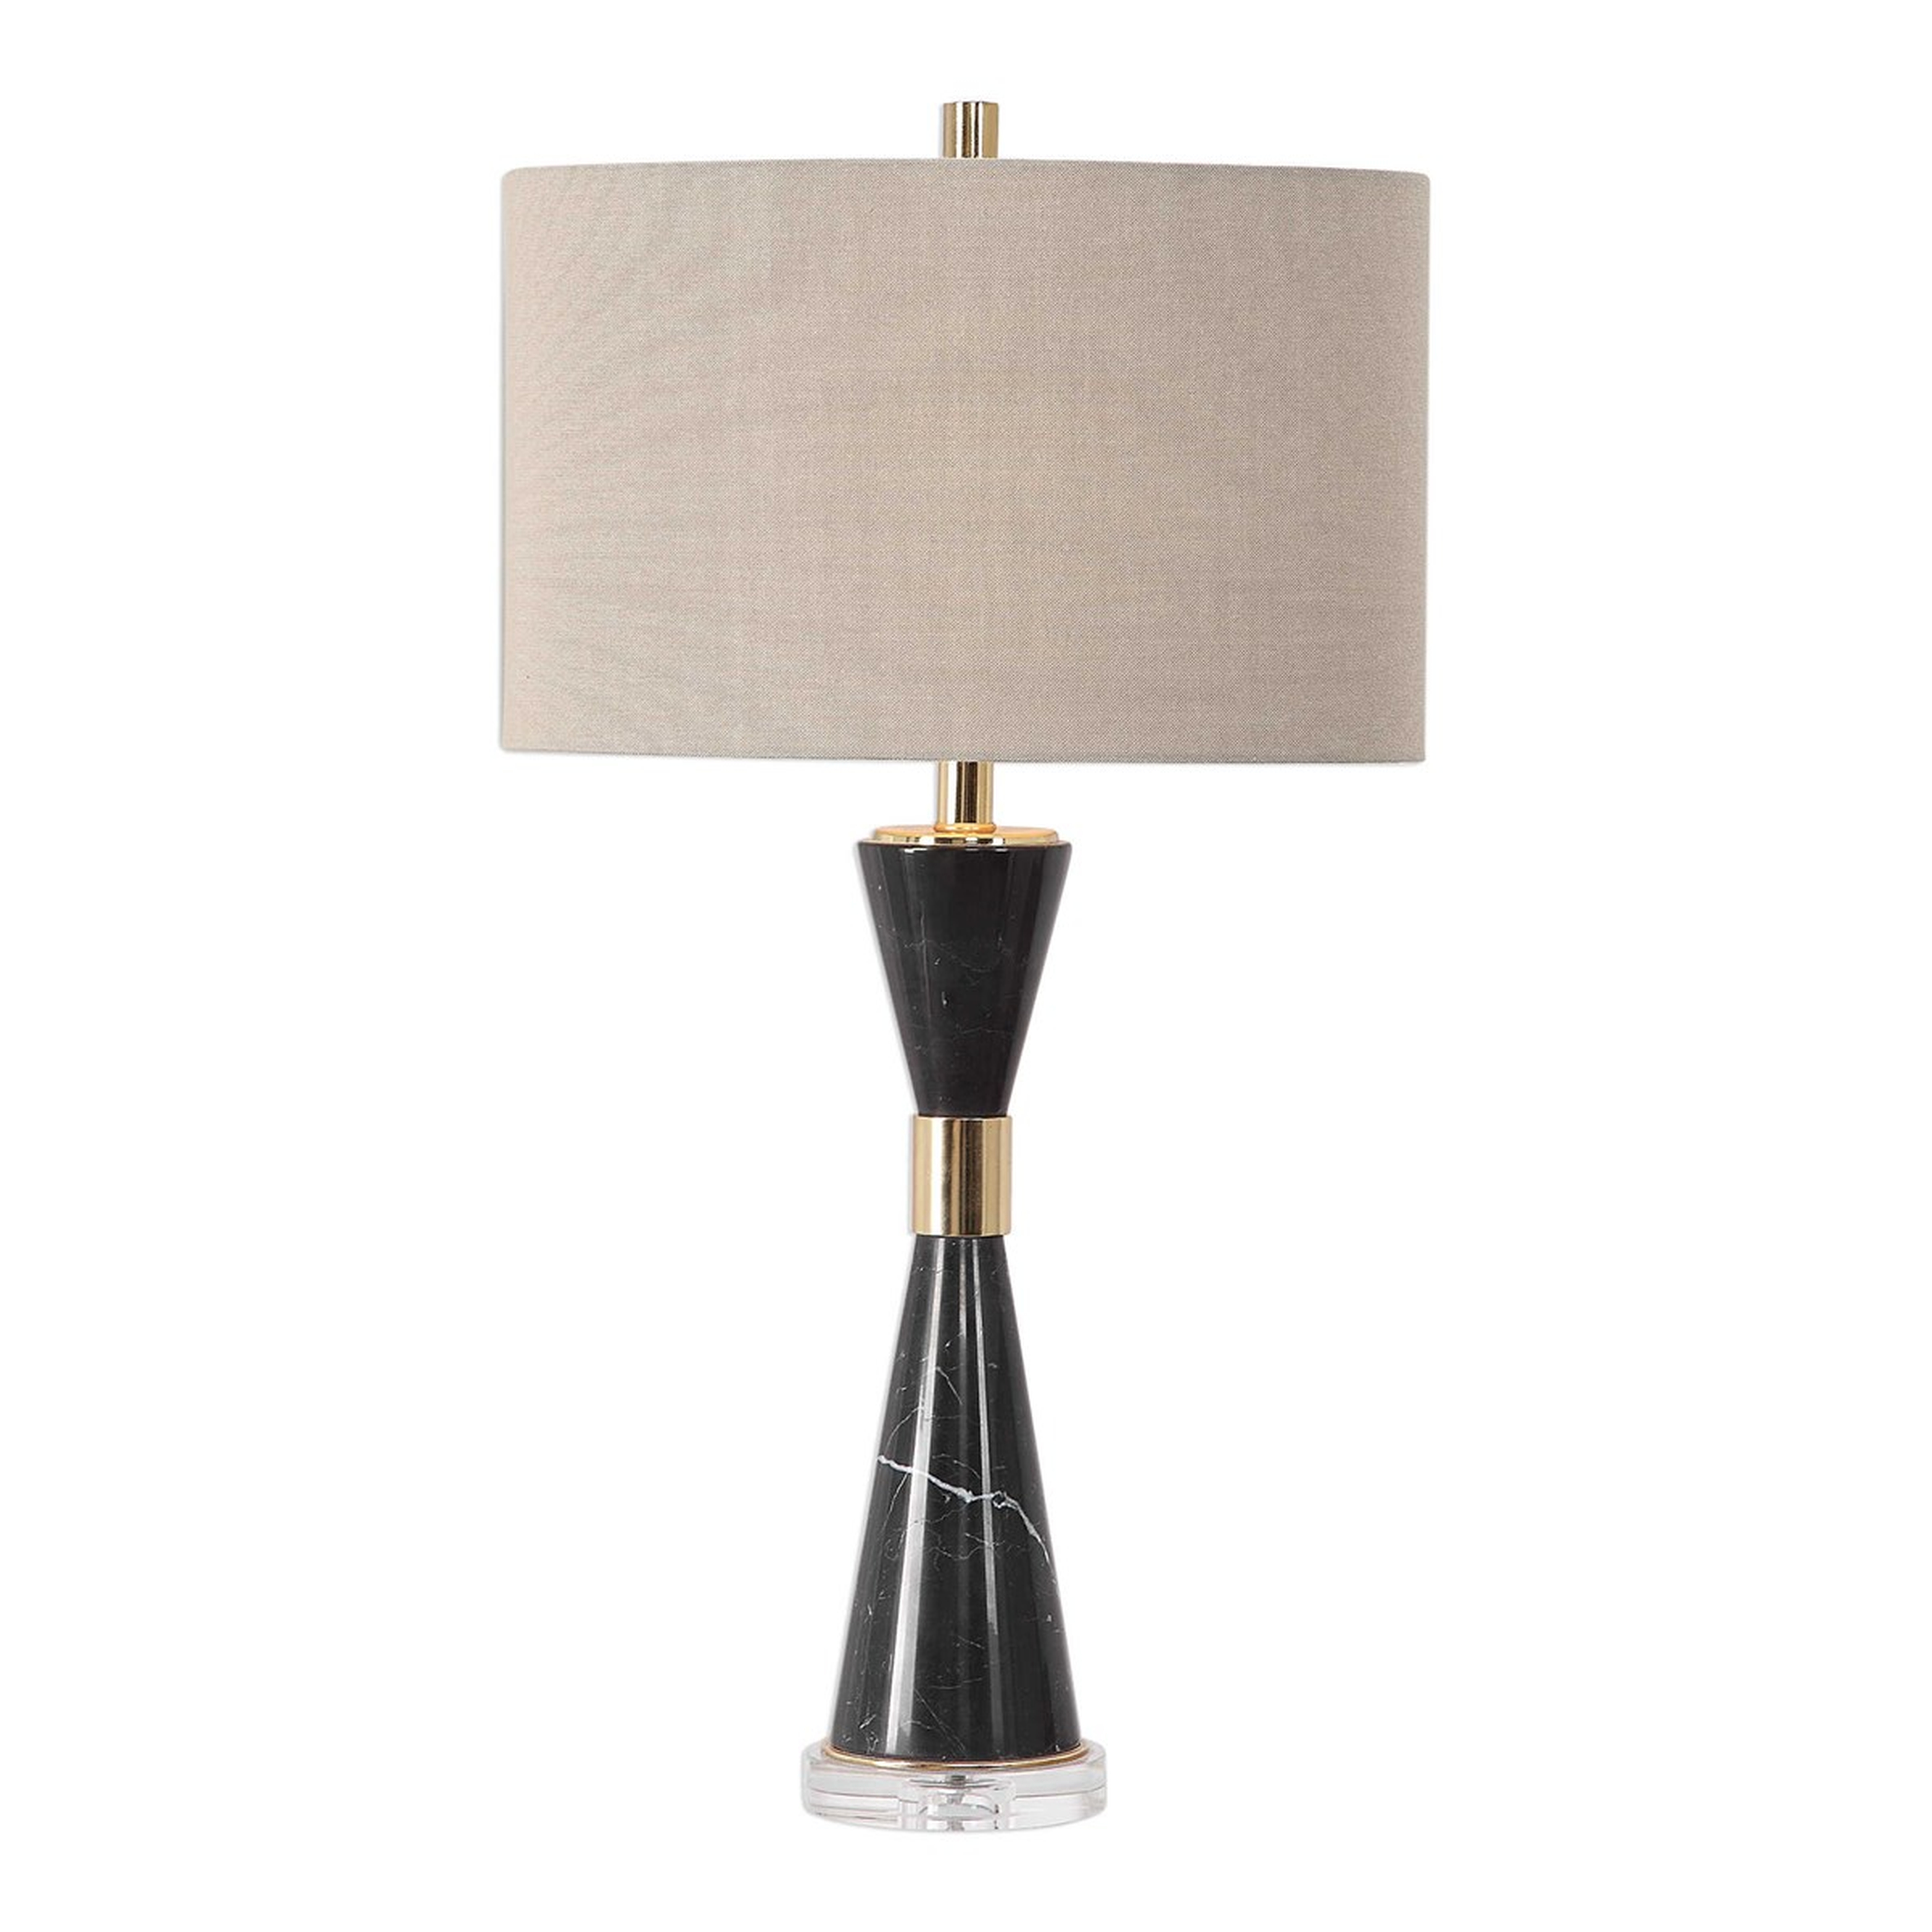 Alastair Black Marble Hourglass Table Lamp - #27886 - Hudsonhill Foundry